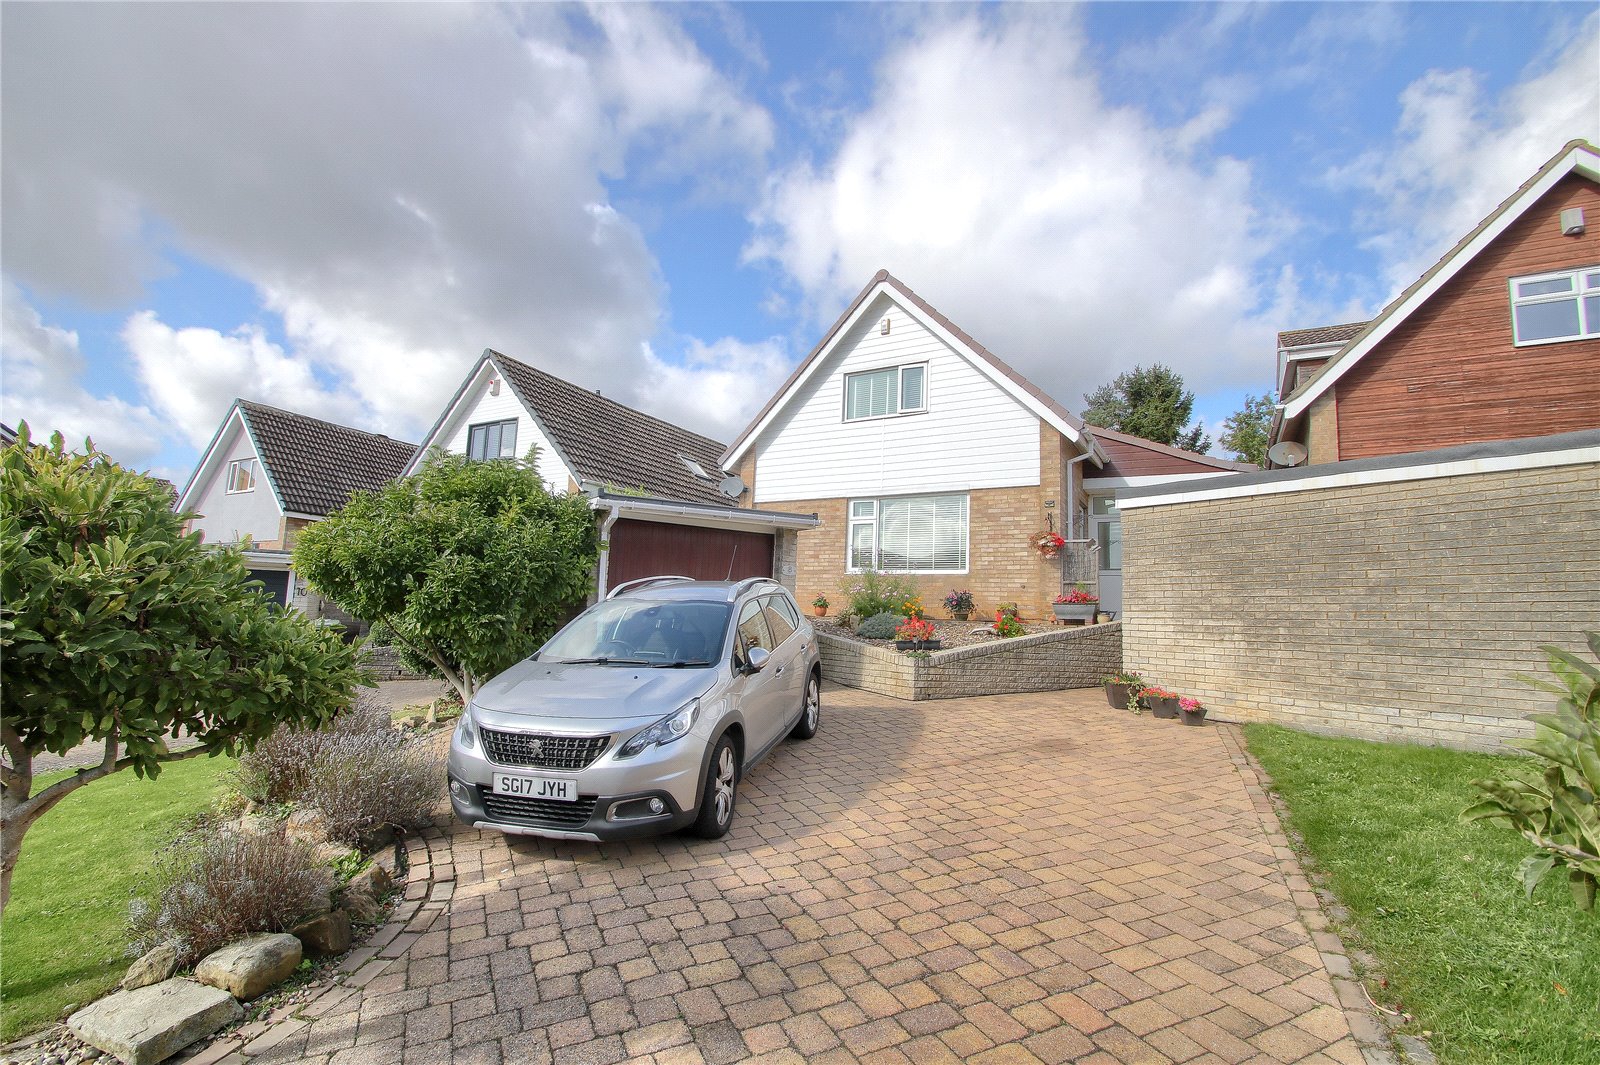 2 bed house for sale in The Slayde, Yarm 1